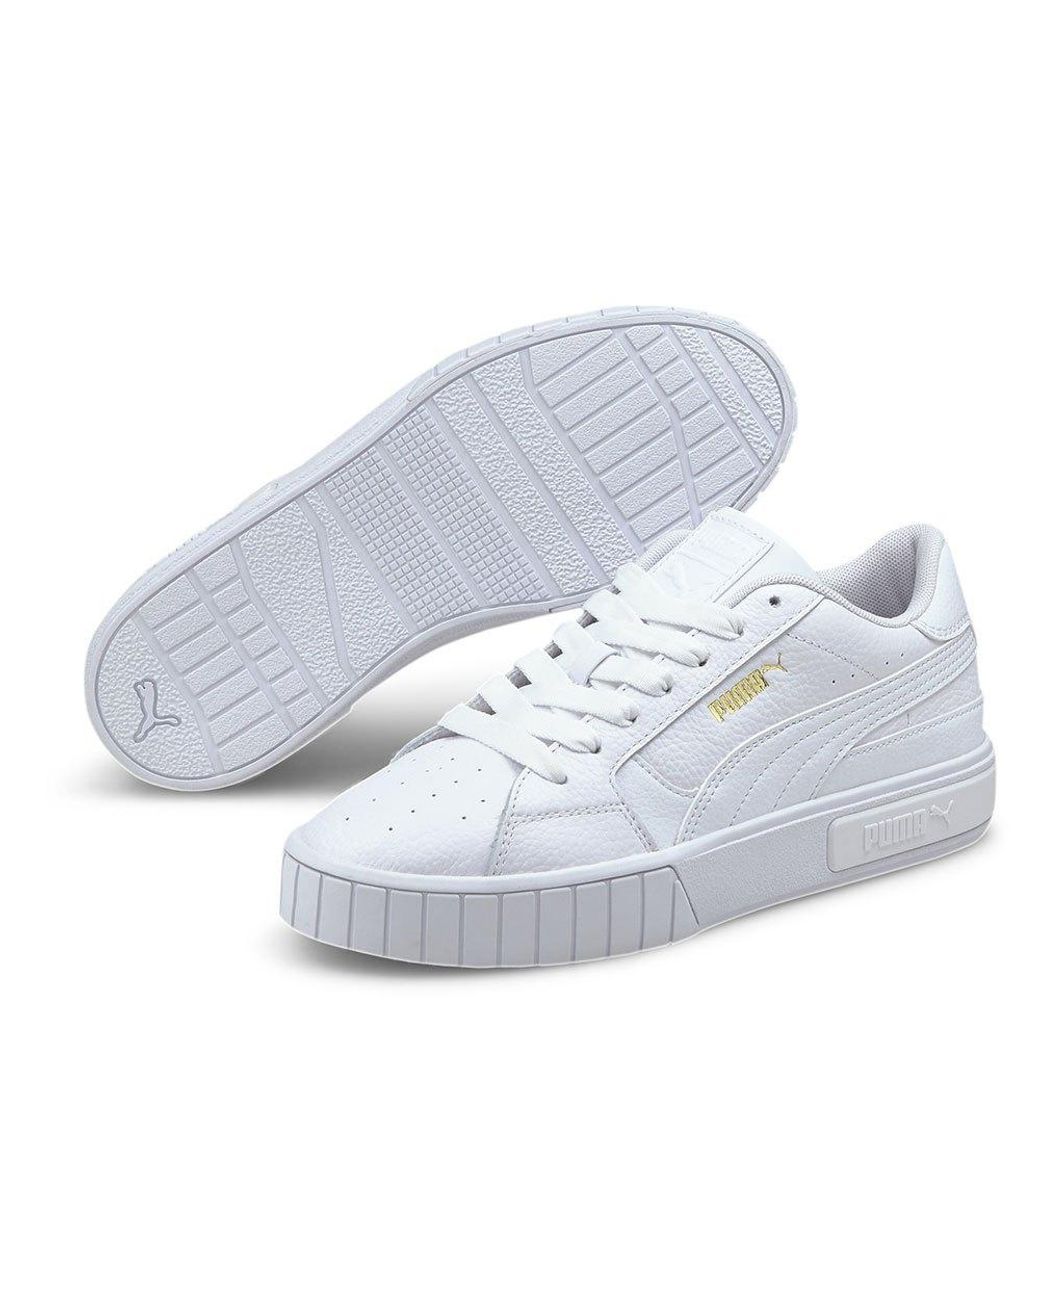 Puma Select Cali Star Trainers in White | Lyst